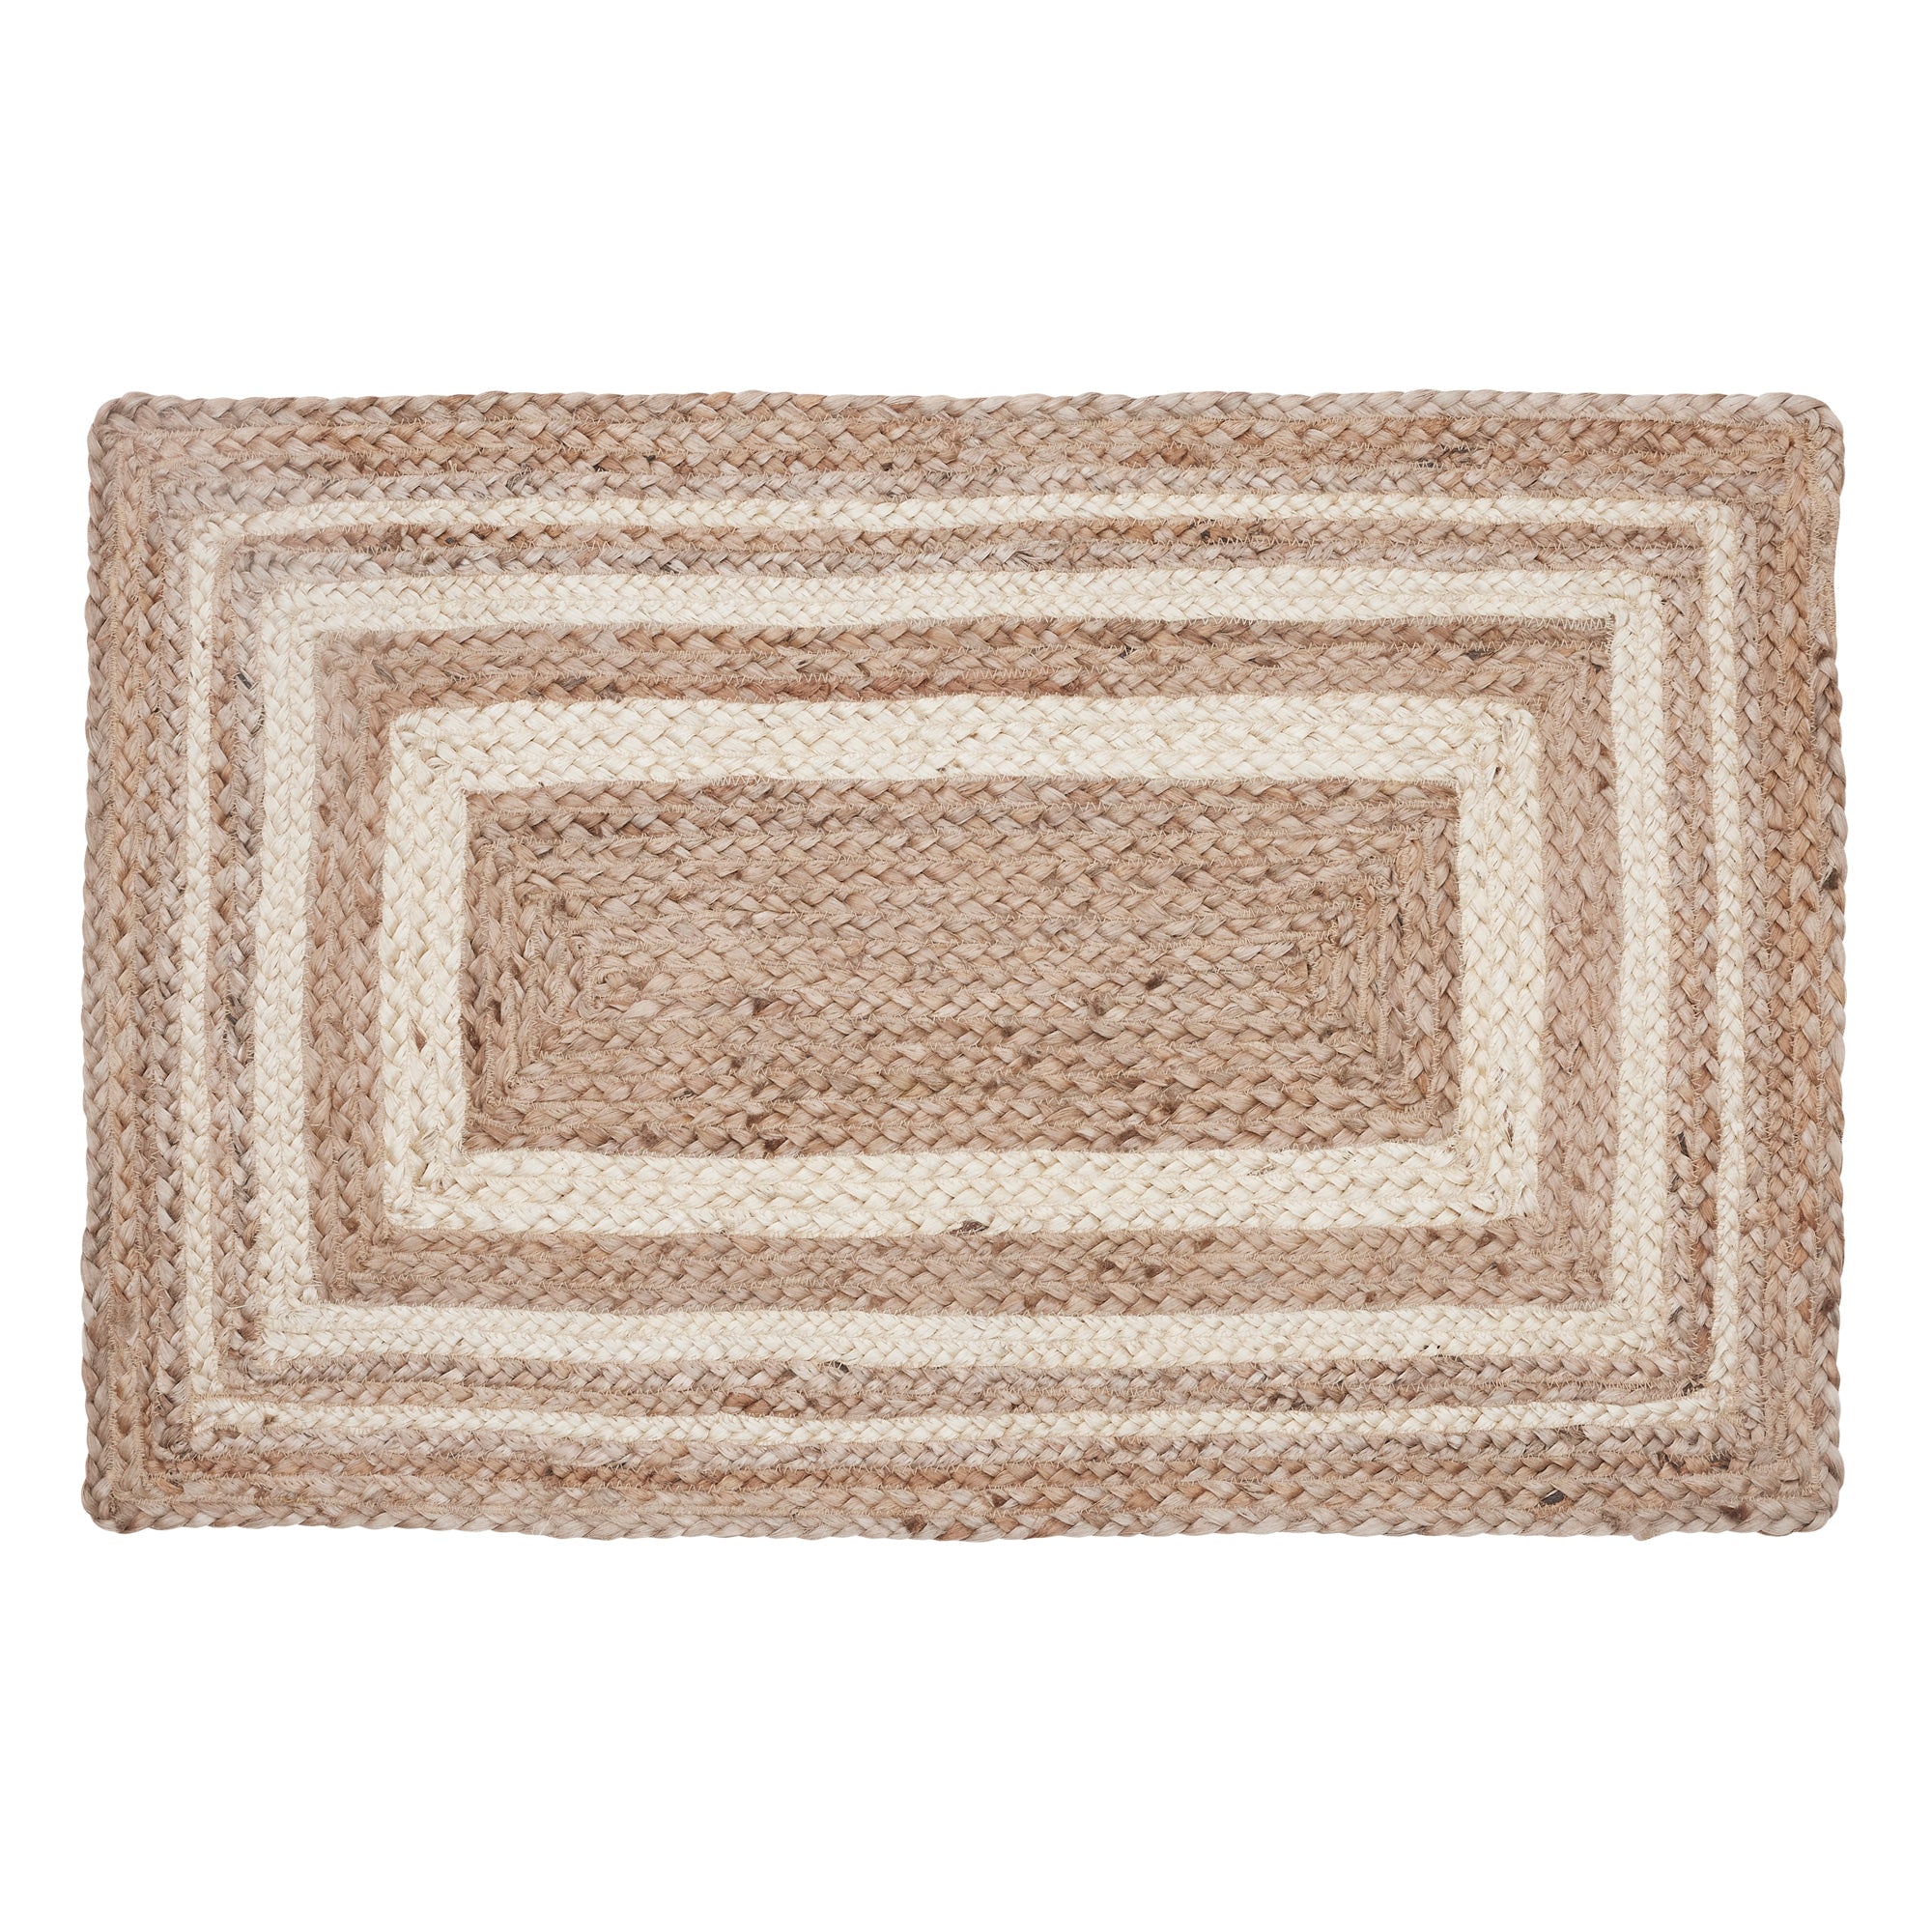 Natural & Creme Jute Braided Rugs Rect with Rug Pads VHC Brands